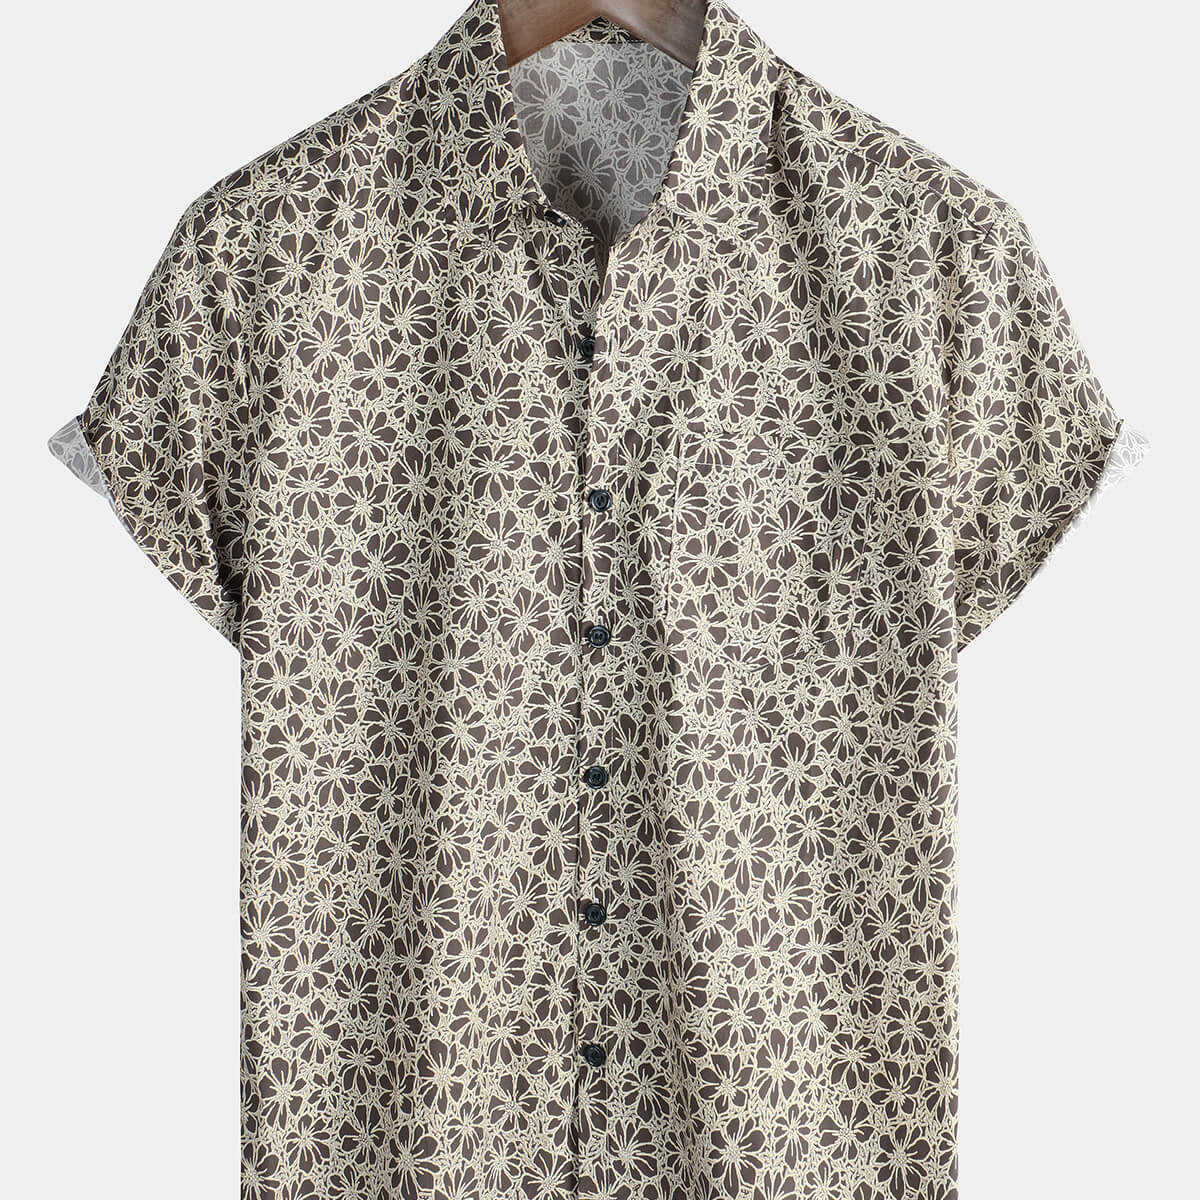 Men's Vintage Holiday Cotton Floral Button Up Short Sleeve Shirt